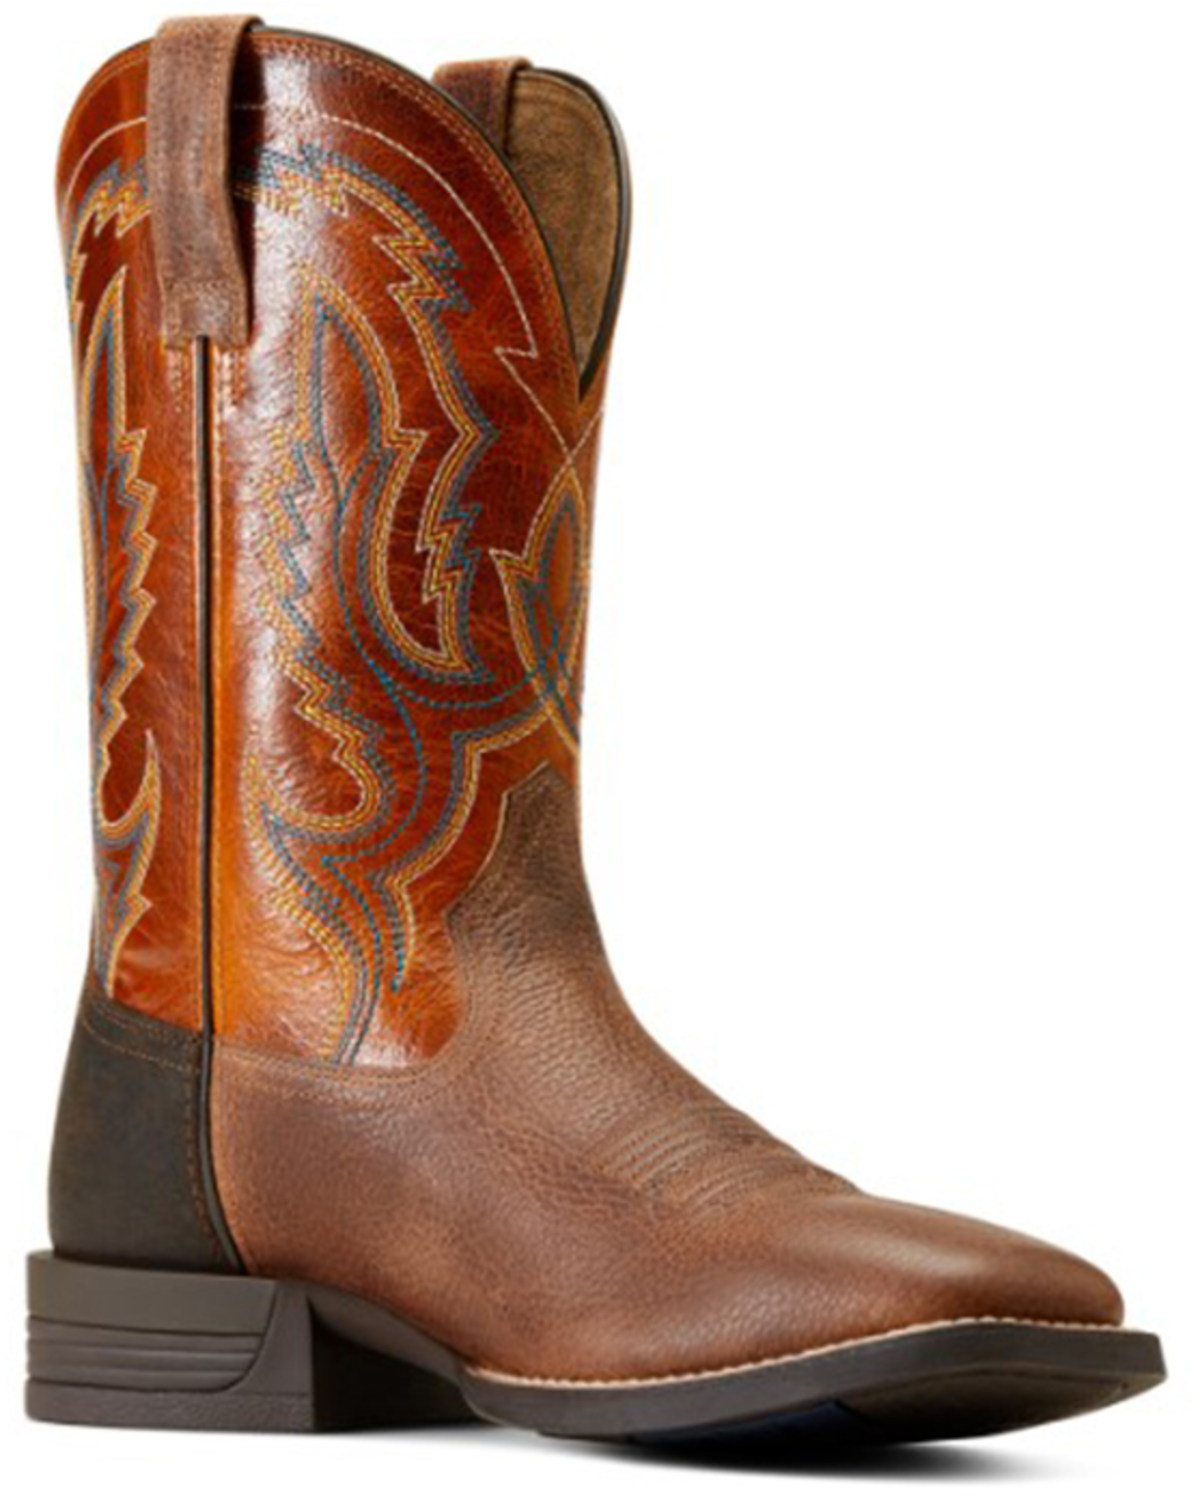 Ariat Men's Steadfast Western Performance Boots - Broad Square Toe